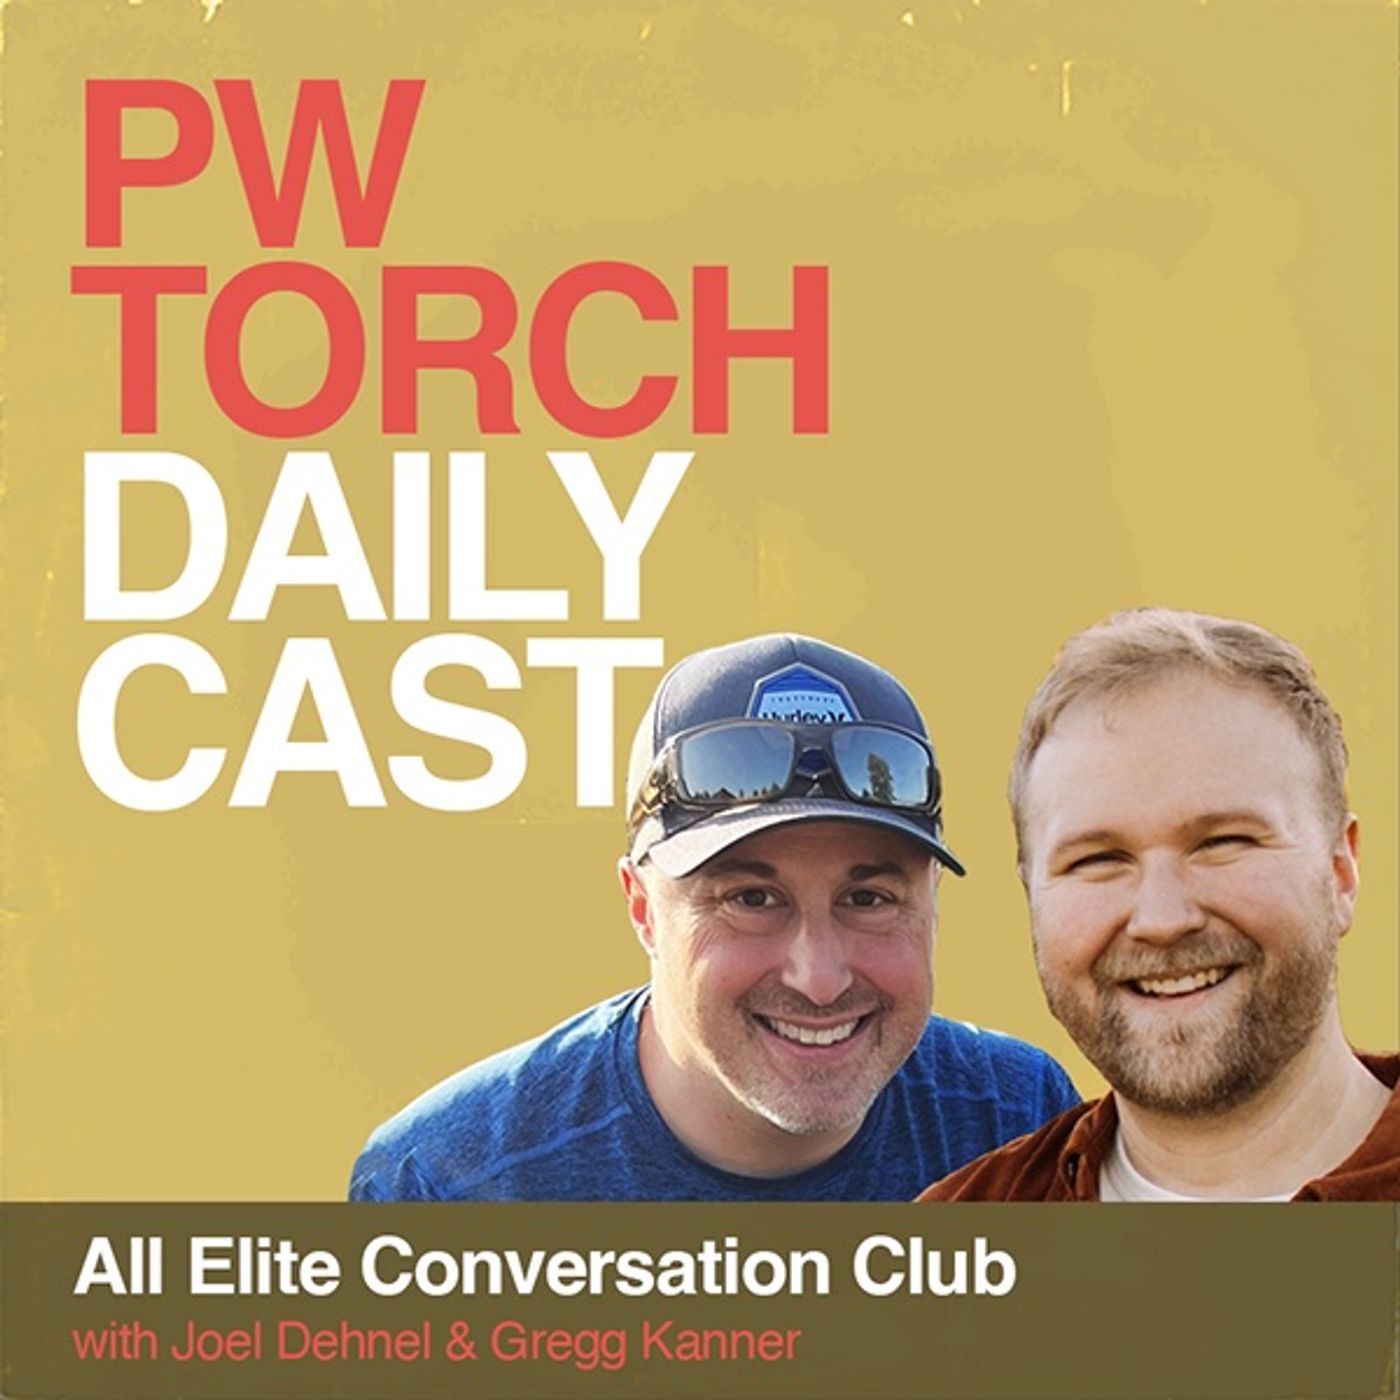 All Elite Conversation Club - Dehnel & Kanner review fallout of AEW Dynasty, Tony Khan being physically in an angle, more